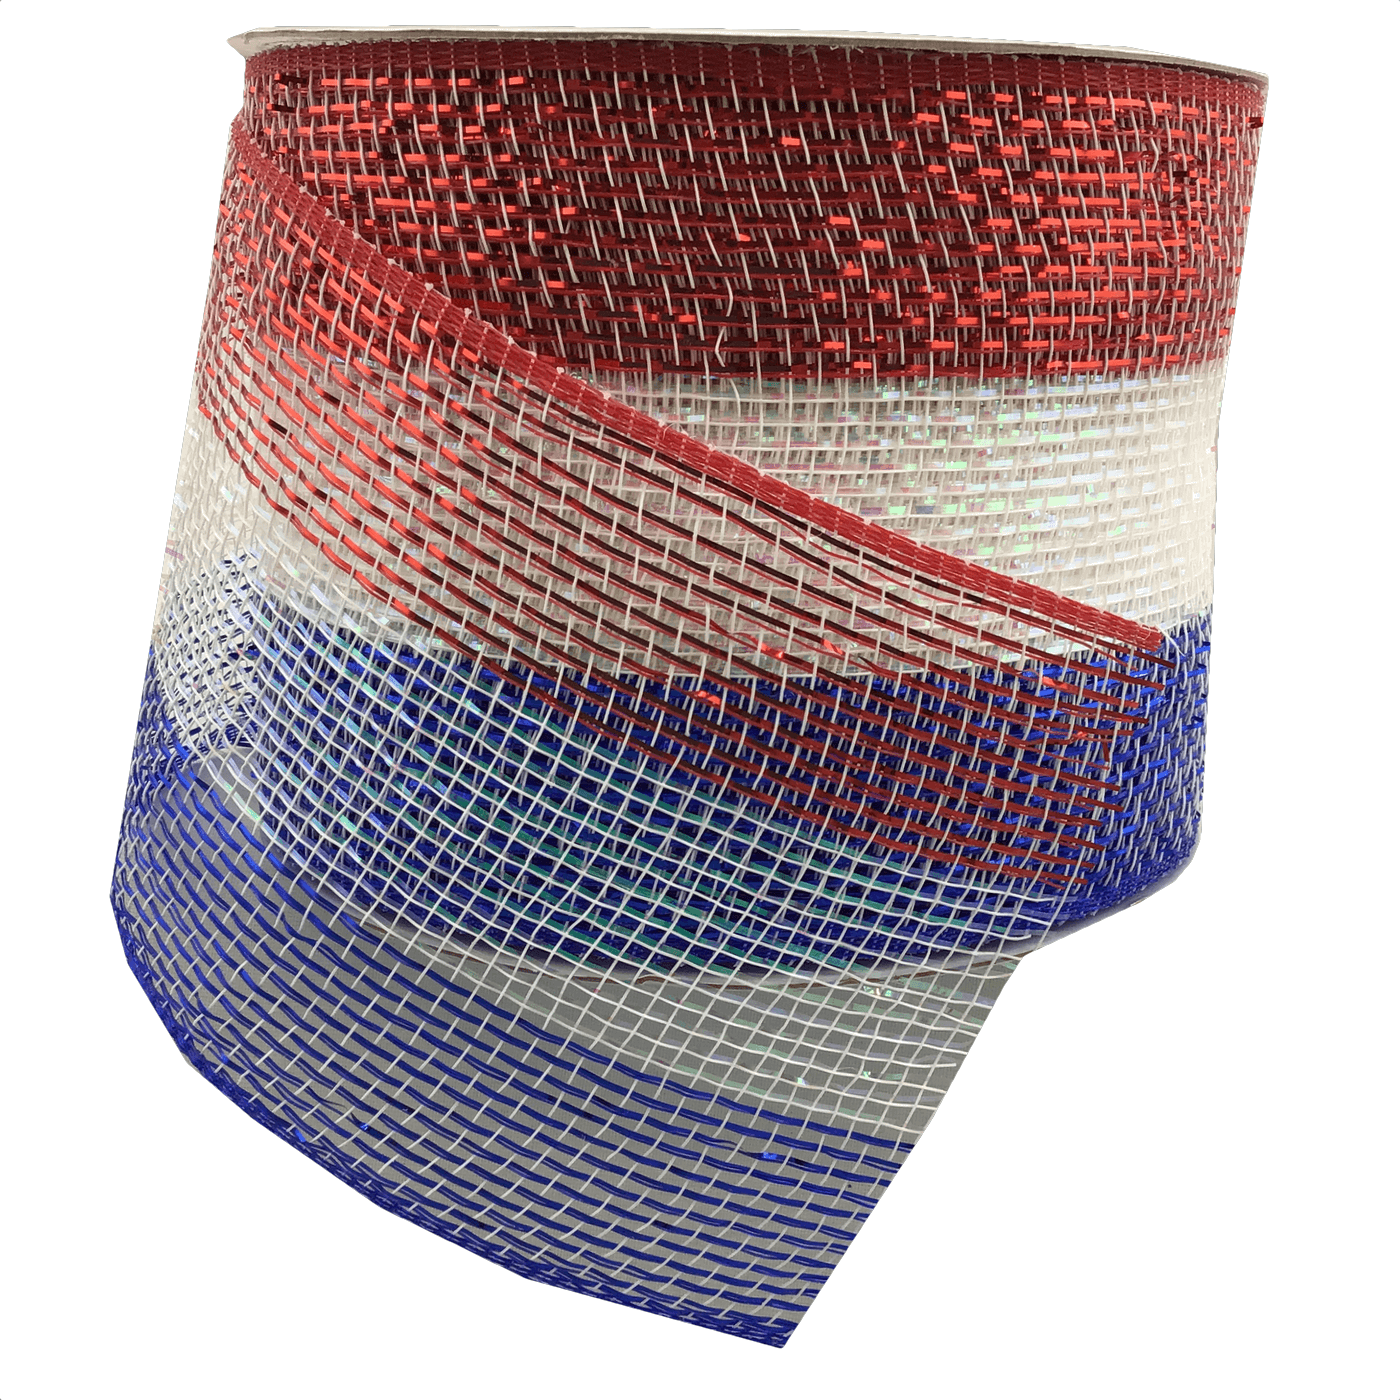 4 Inch by 20 Yards Designer Netting Red White and Blue Glamour